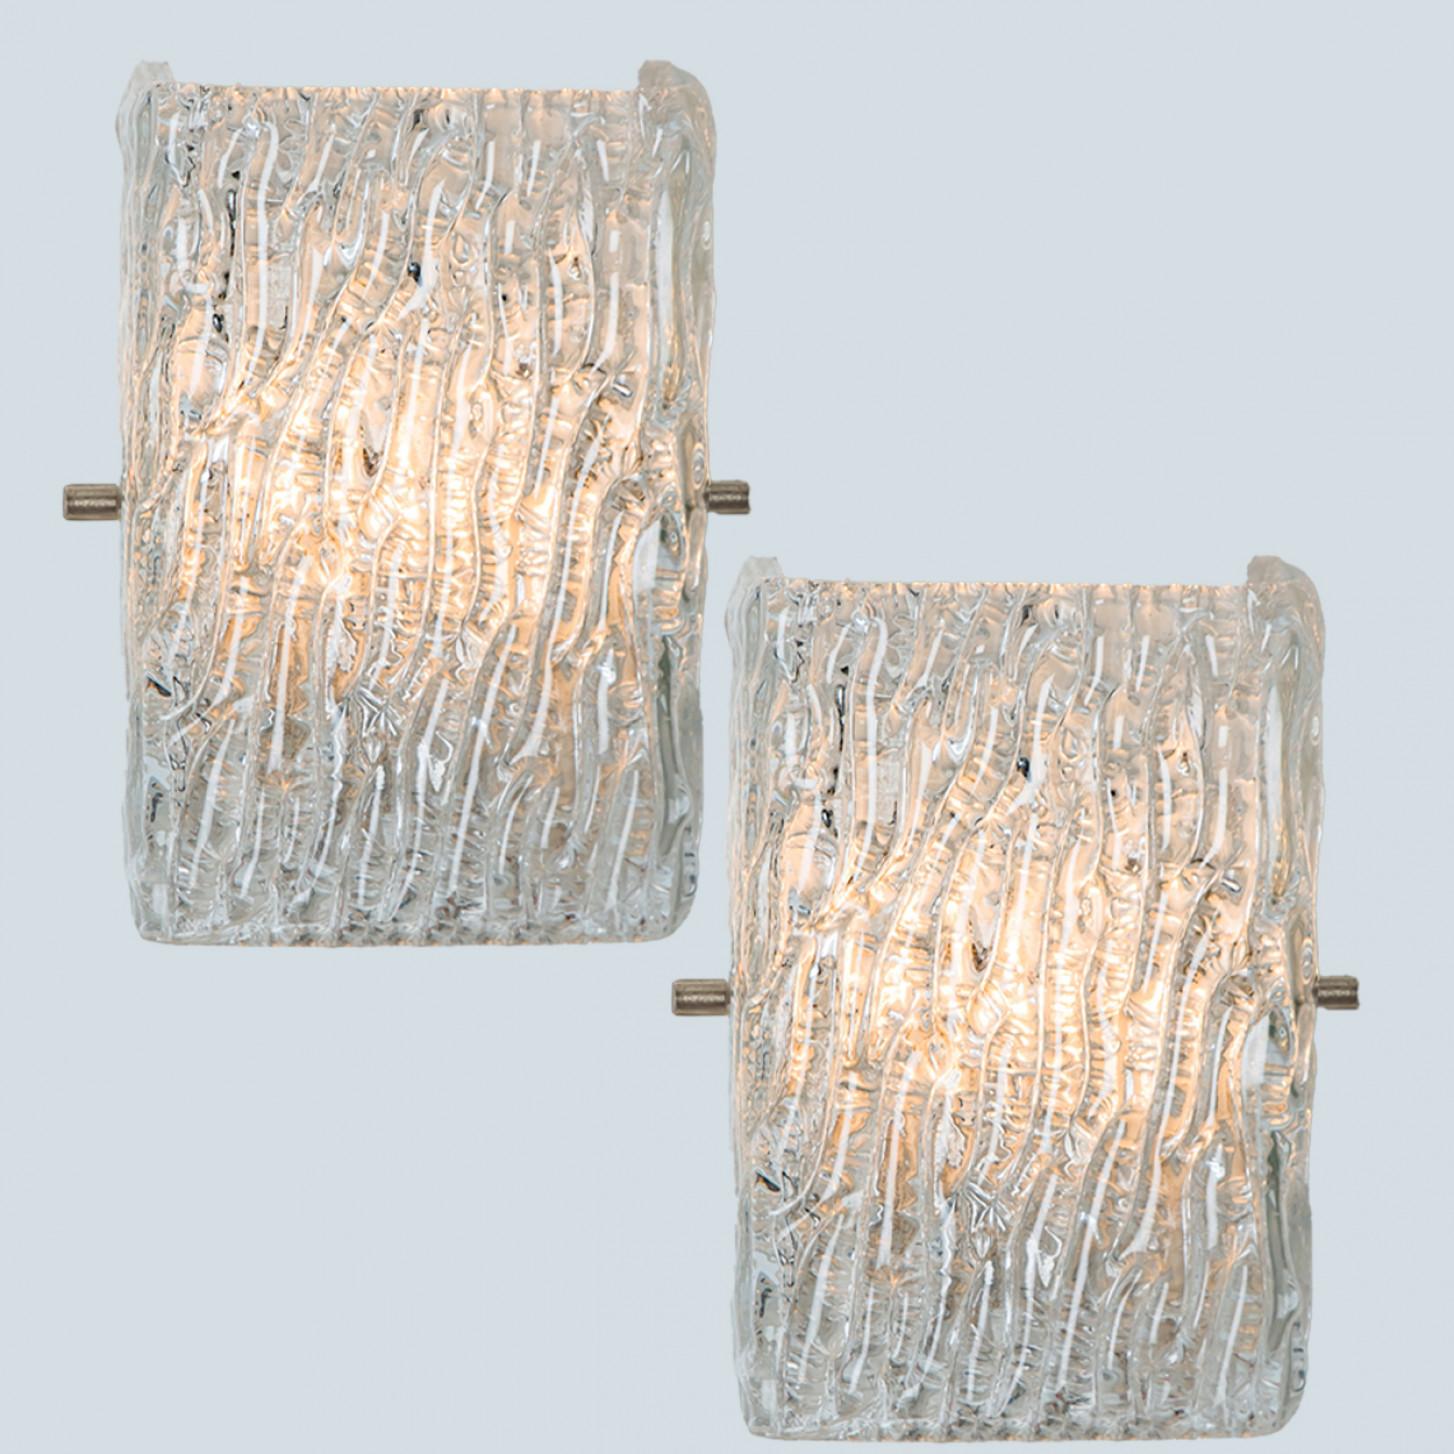 Beautiful high quality light fixture made by Kalmar, Austria. Manufactured in mid century, circa 1970 (at the end of 1960s and beginning of 1970s).

This wall light features lights made of handmade ice glass and white back plate. The sides refract